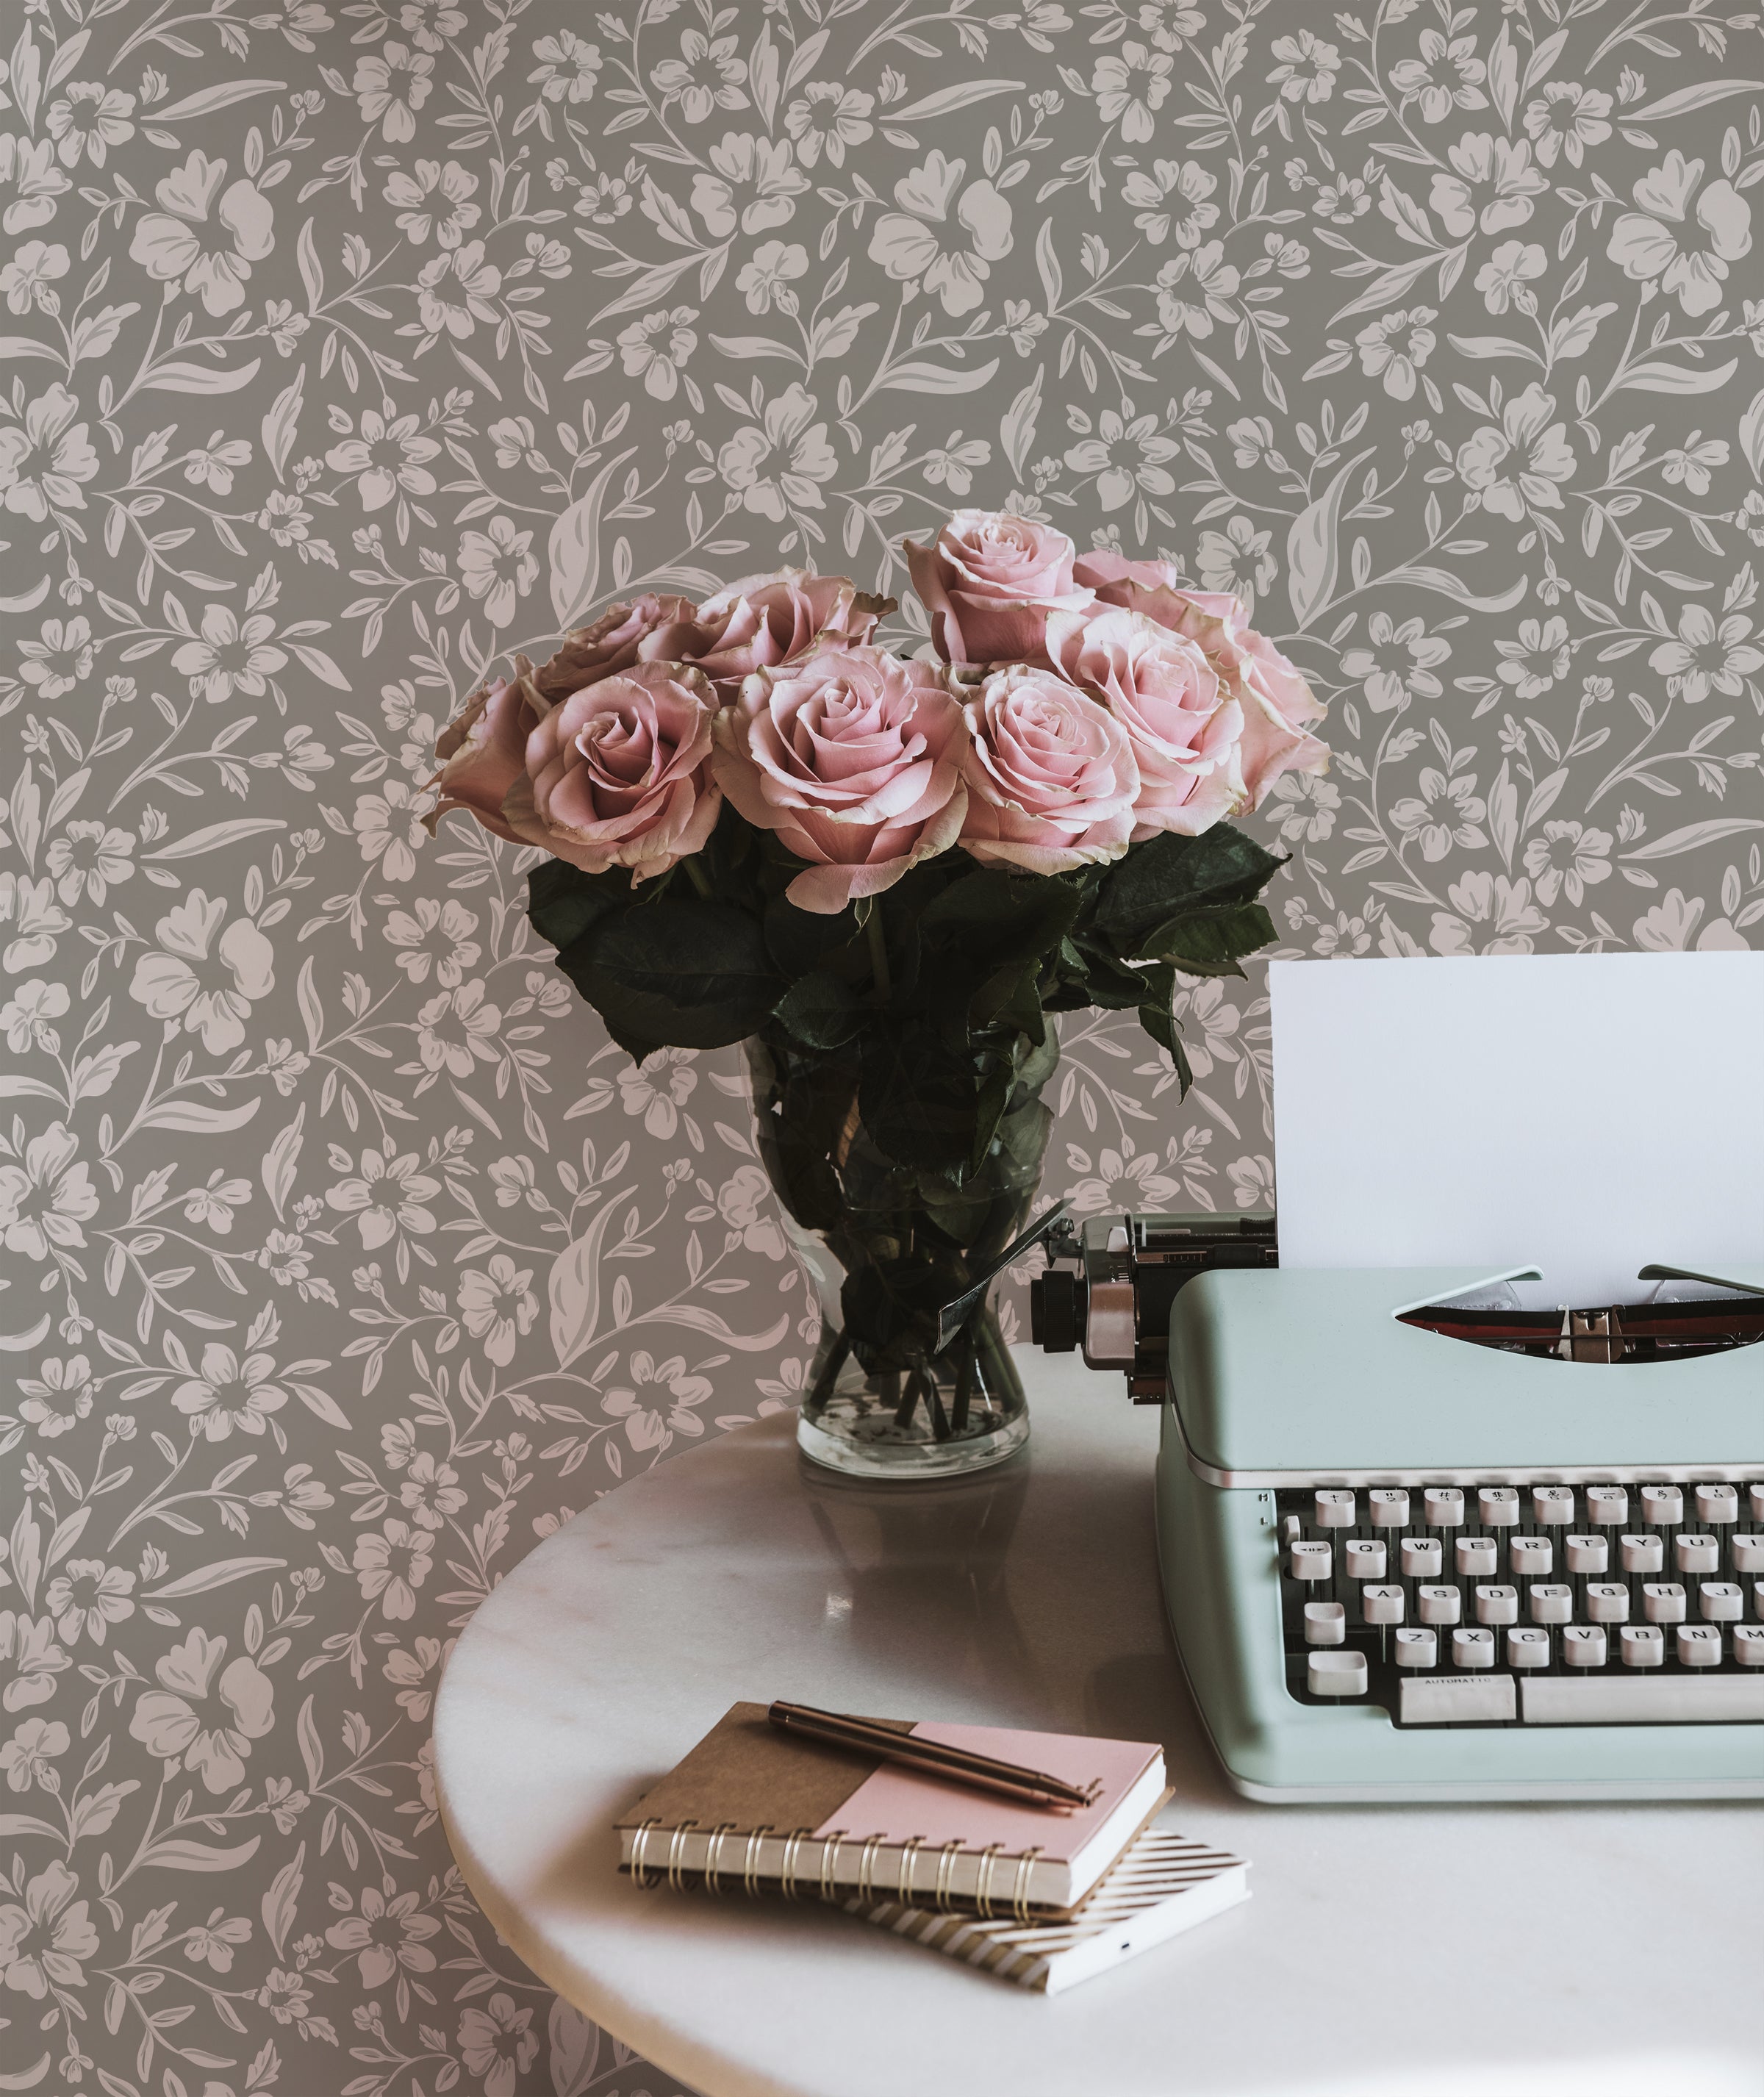 A cozy desk setup with the Soft Meadows Wallpaper in the background, showcasing its elegant floral pattern. A vase of pink roses and a mint green typewriter on a round marble table add a vintage charm.